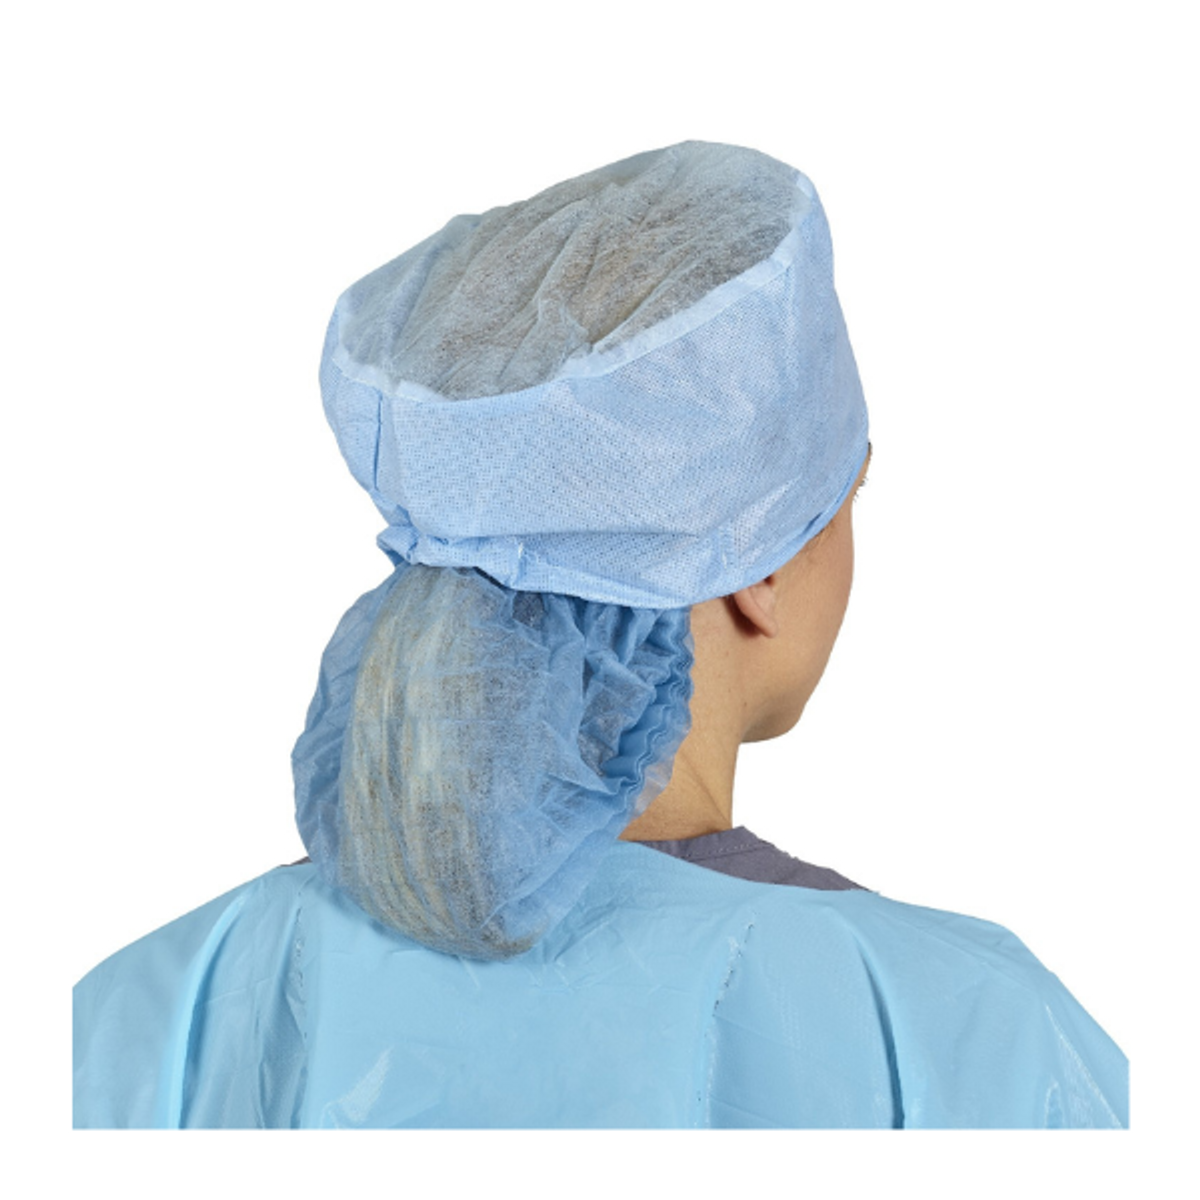 Halyard Protective Surgical Cap